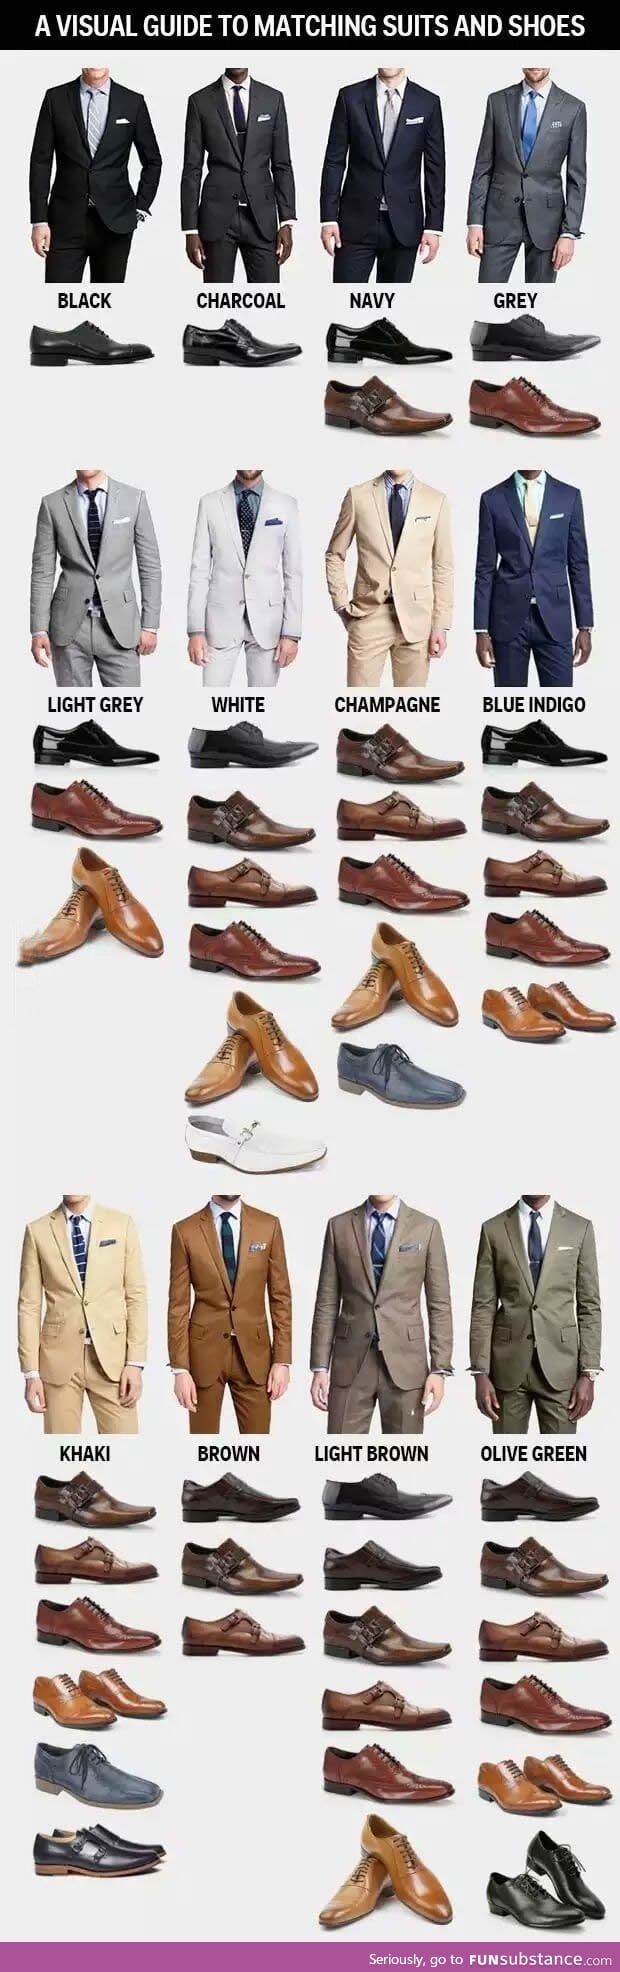 A visual guide to match suits and shoes